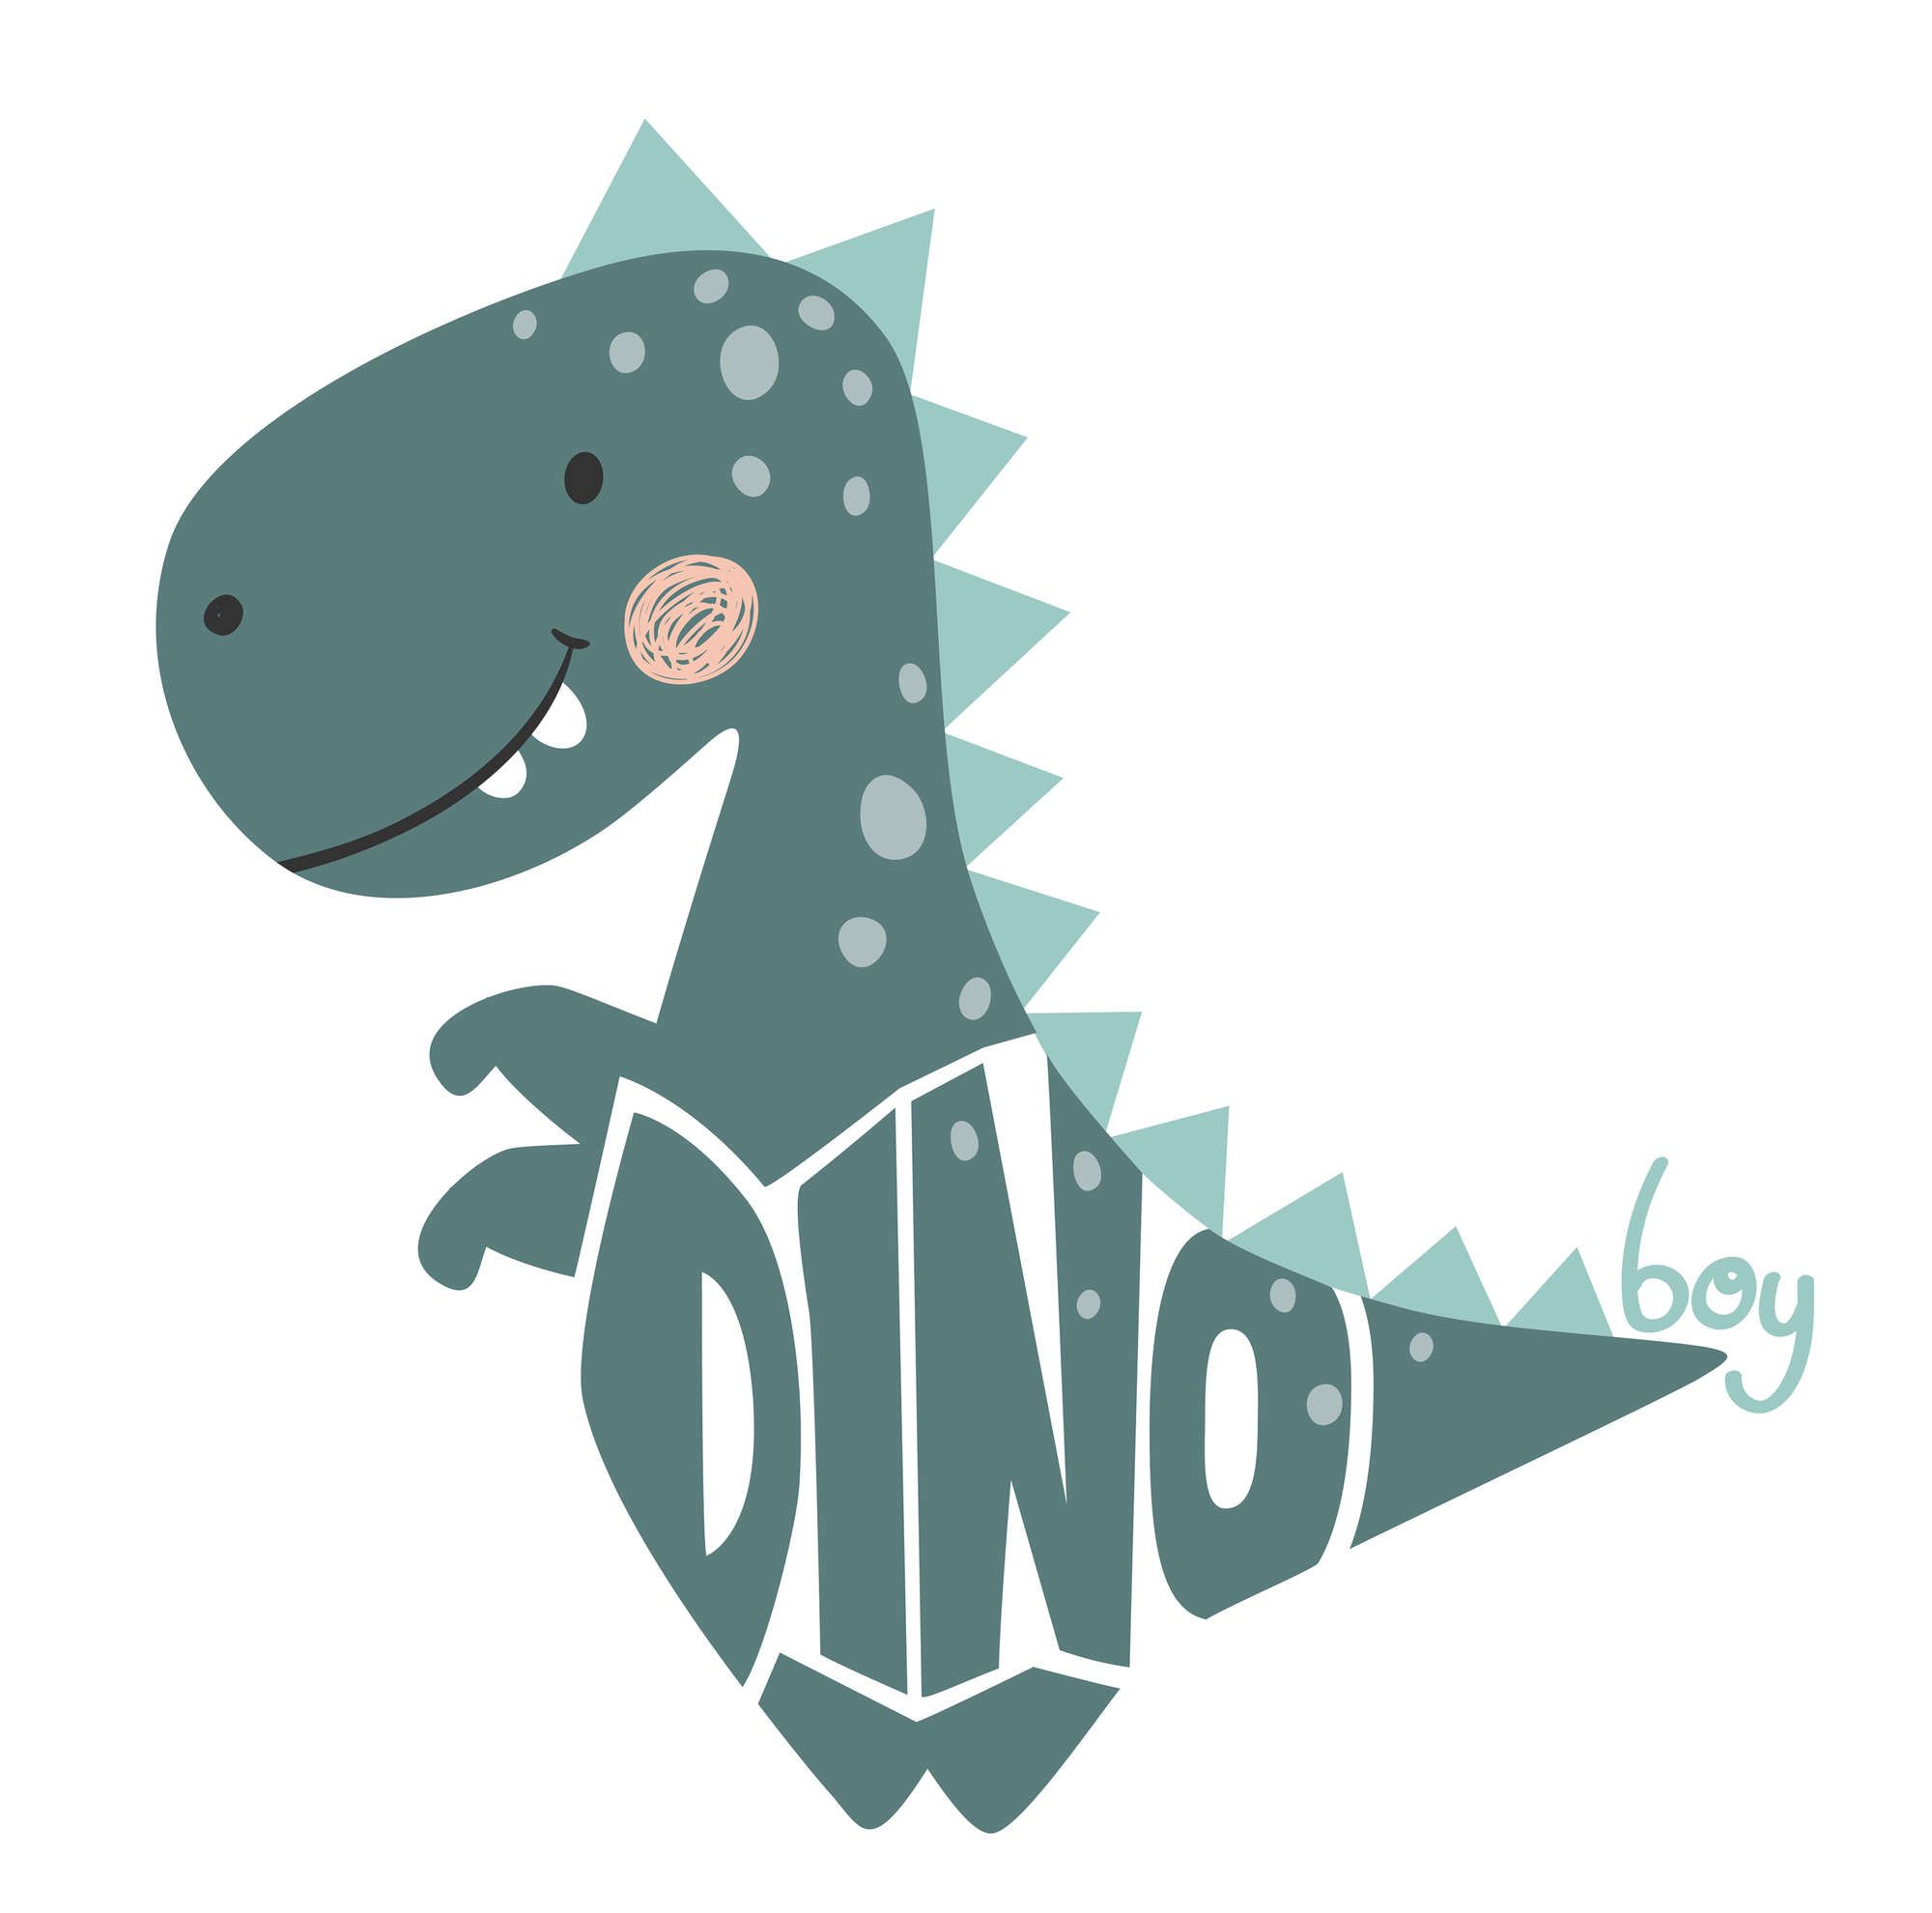             Photo wallpaper for the children's room with dinosaur - Smooth & slightly shiny non-woven
        